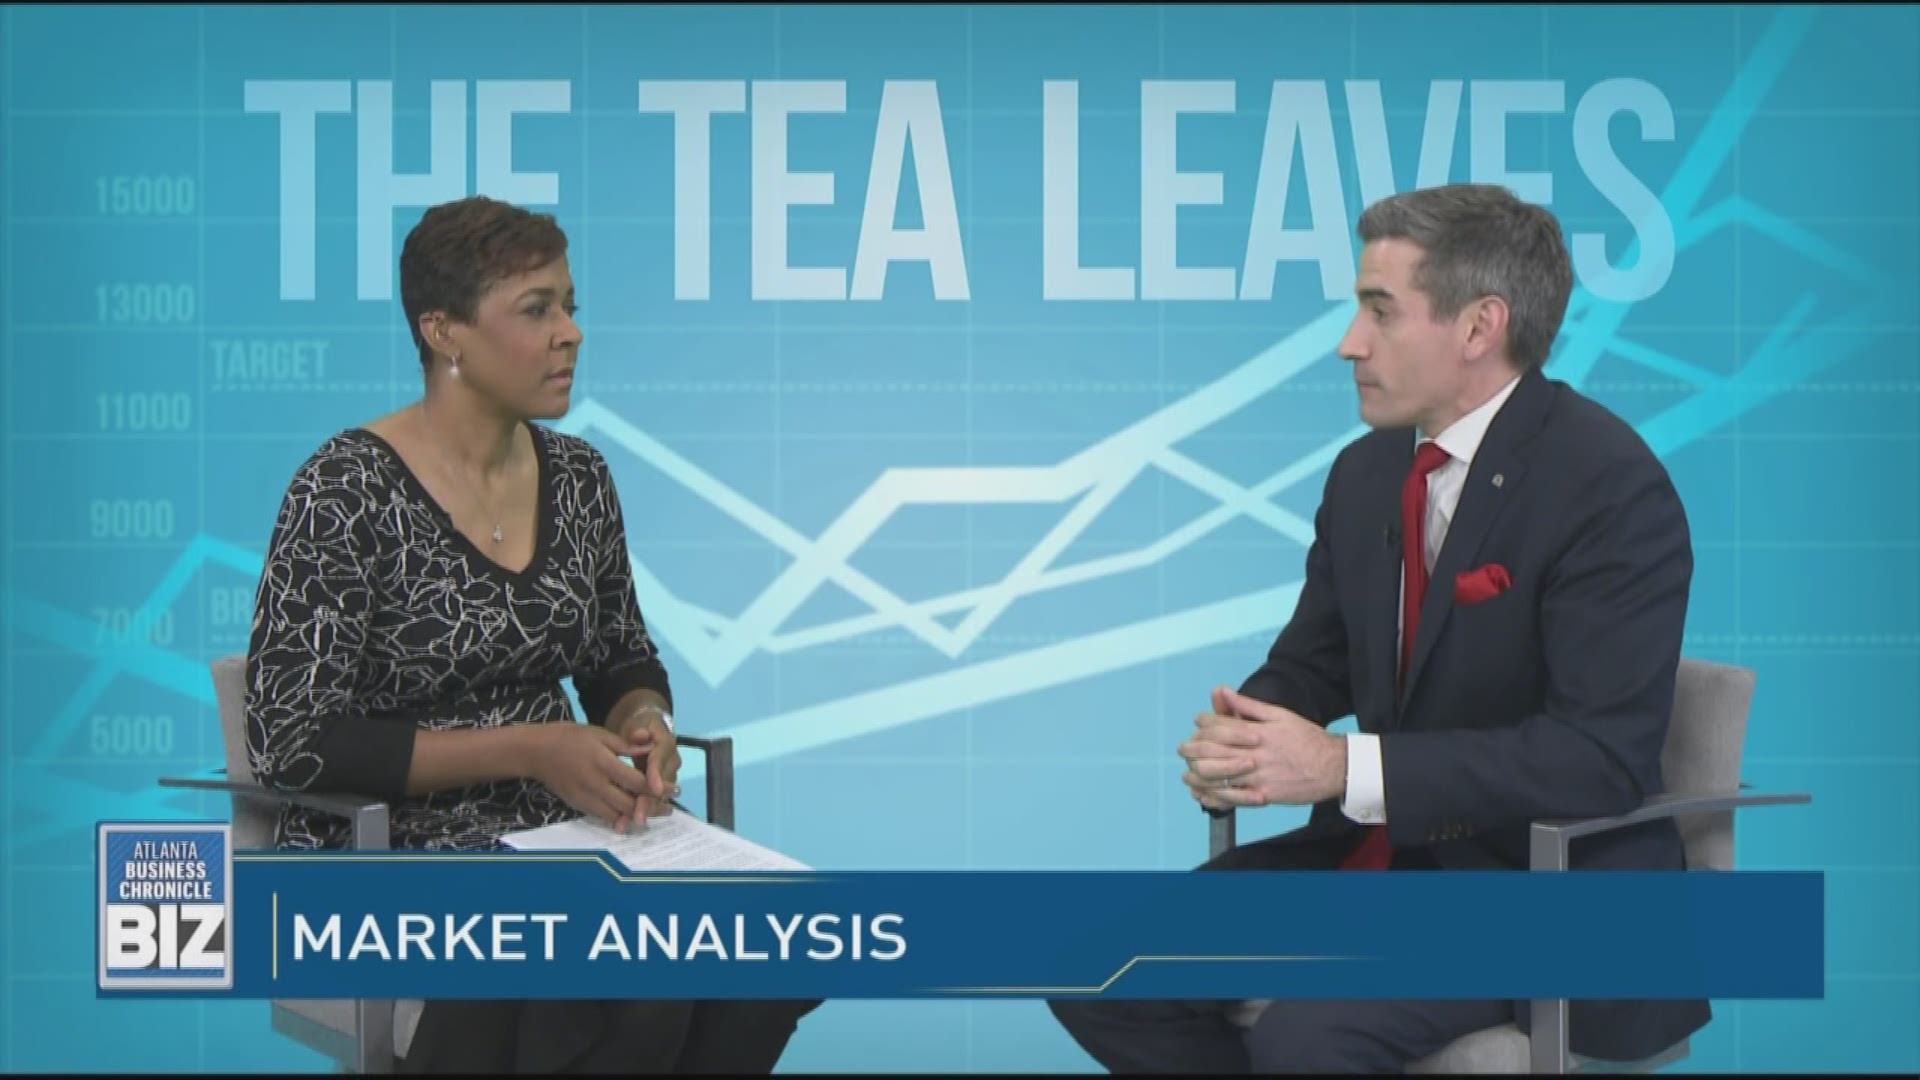 Sifting through the Tea Leaves! SunTrust Chief Market Strategist Keith Lerner joins Crystal Edmonson on 'Atlanta Business Chronicle's BIZ' to share a stock market outlook for 2019.